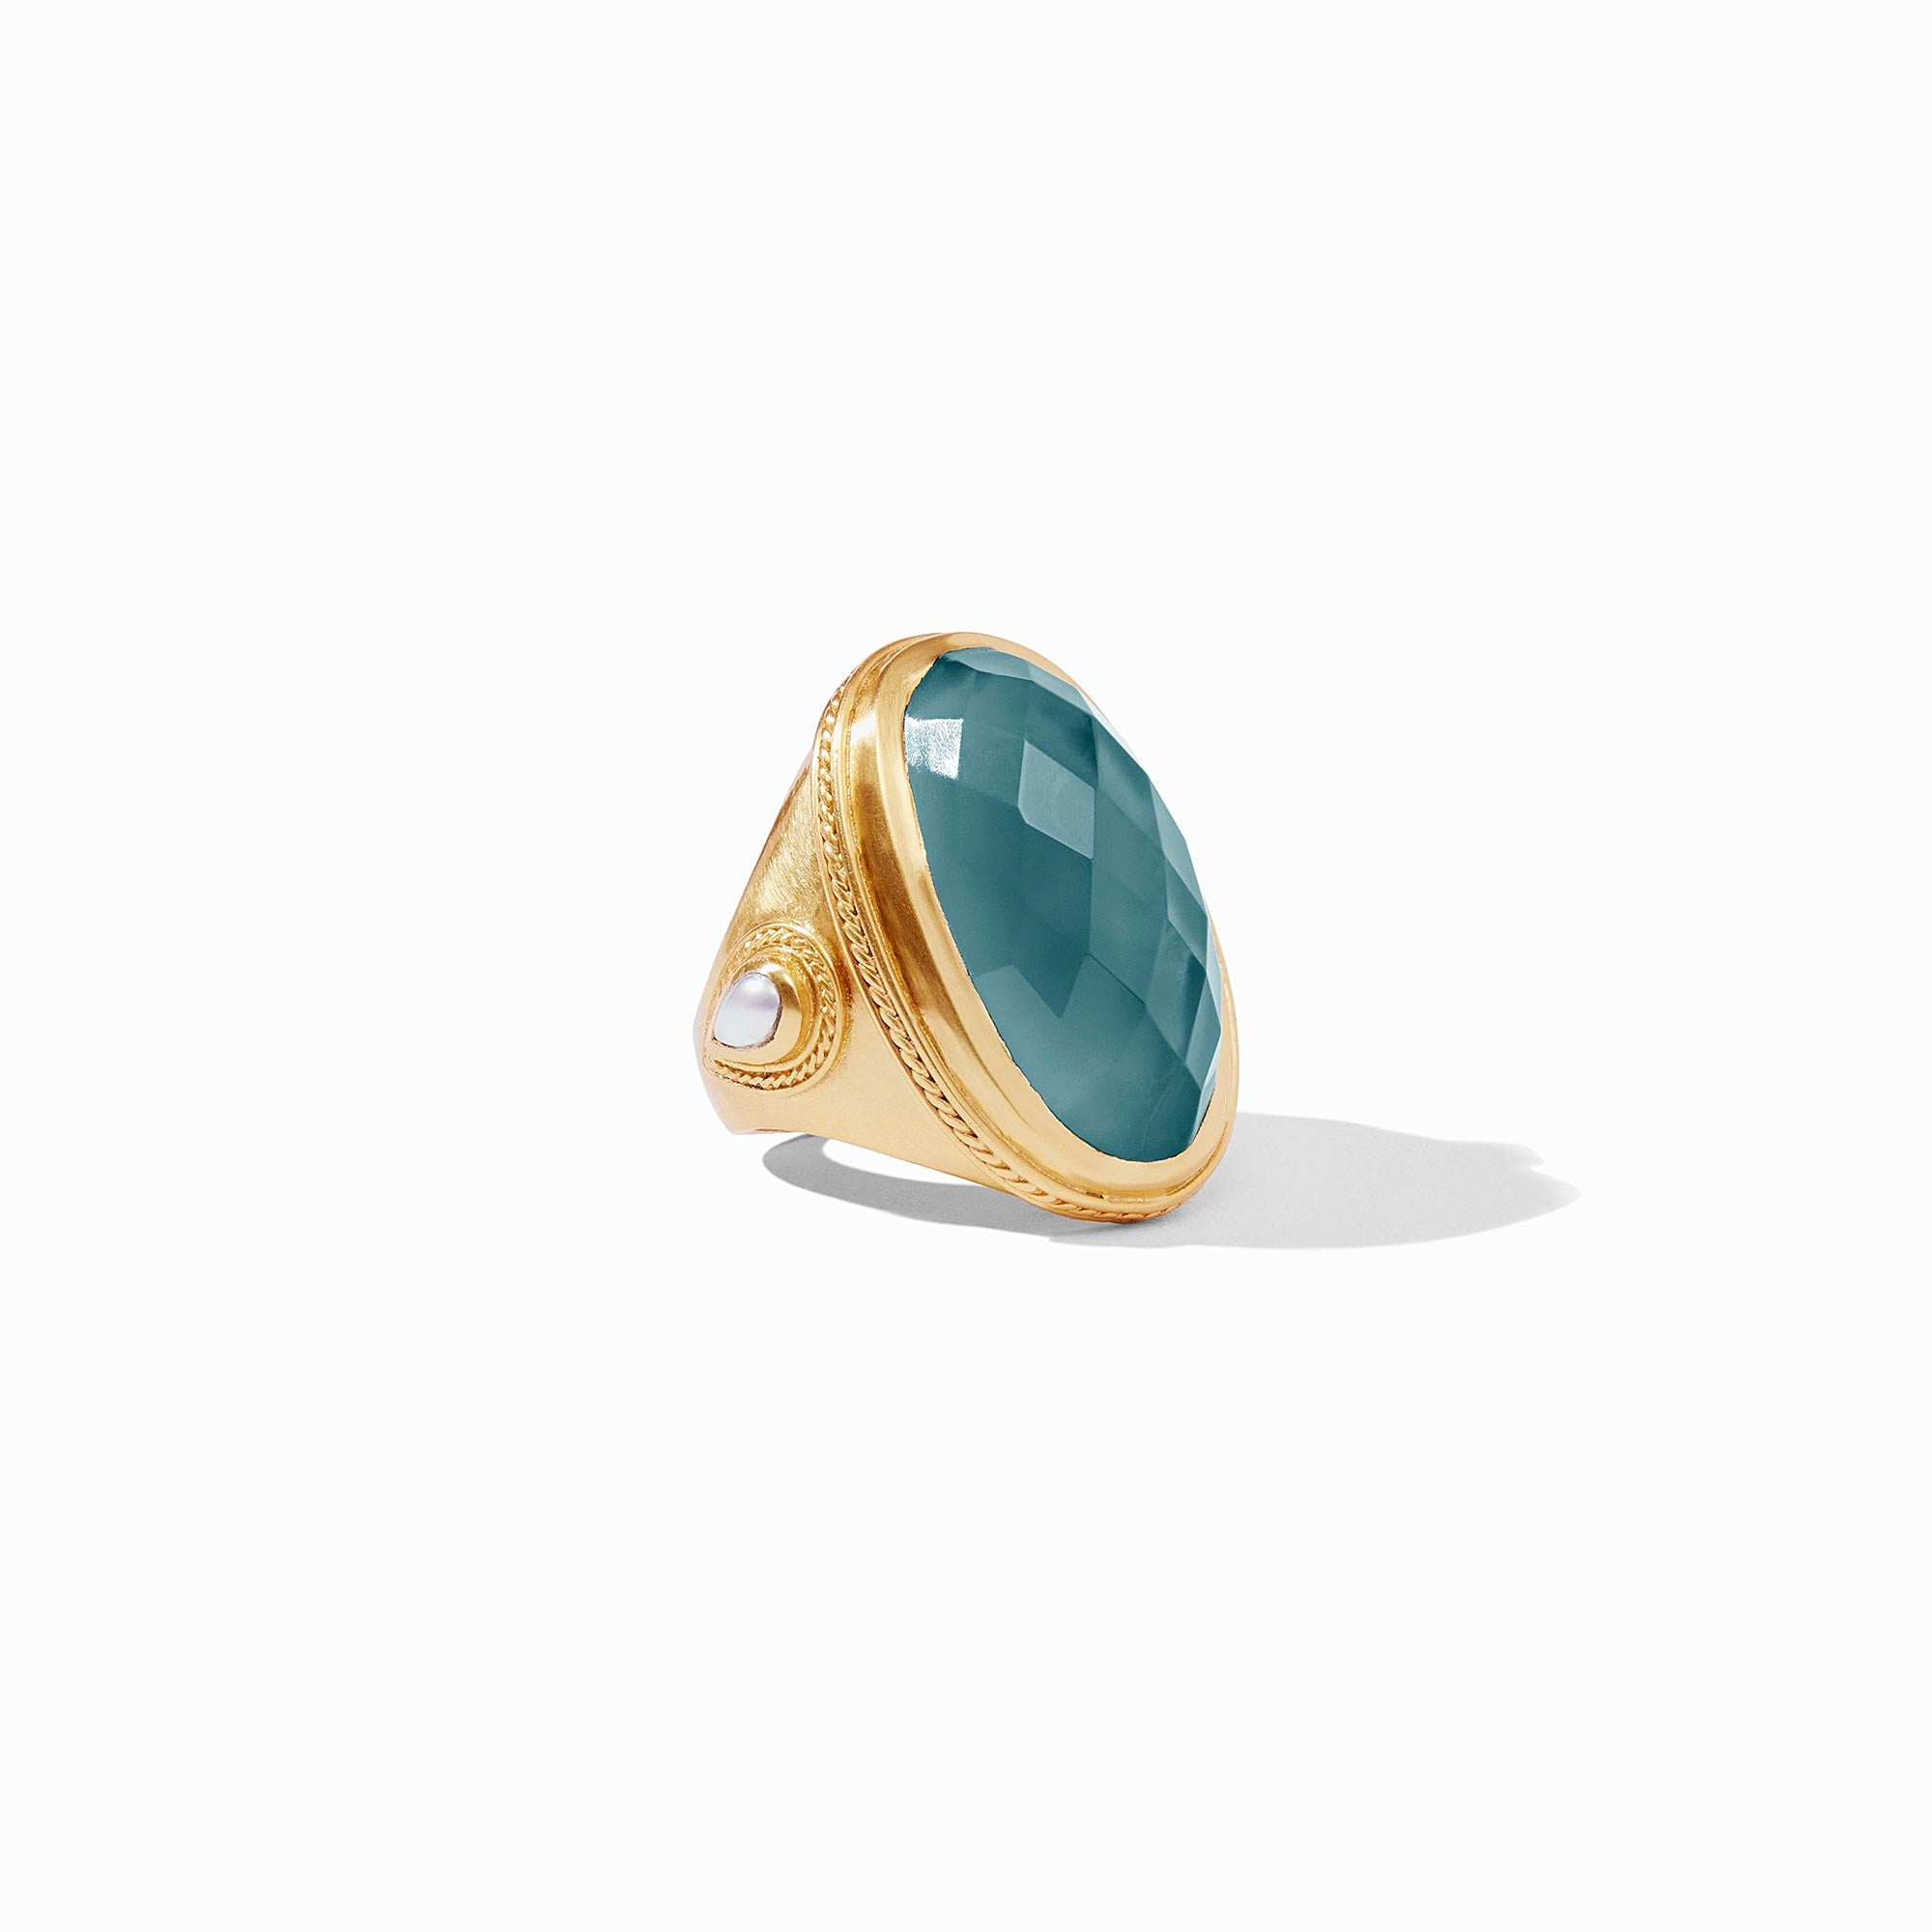 Julie Vos - Cannes Statement Ring, Iridescent Peacock Blue / 8